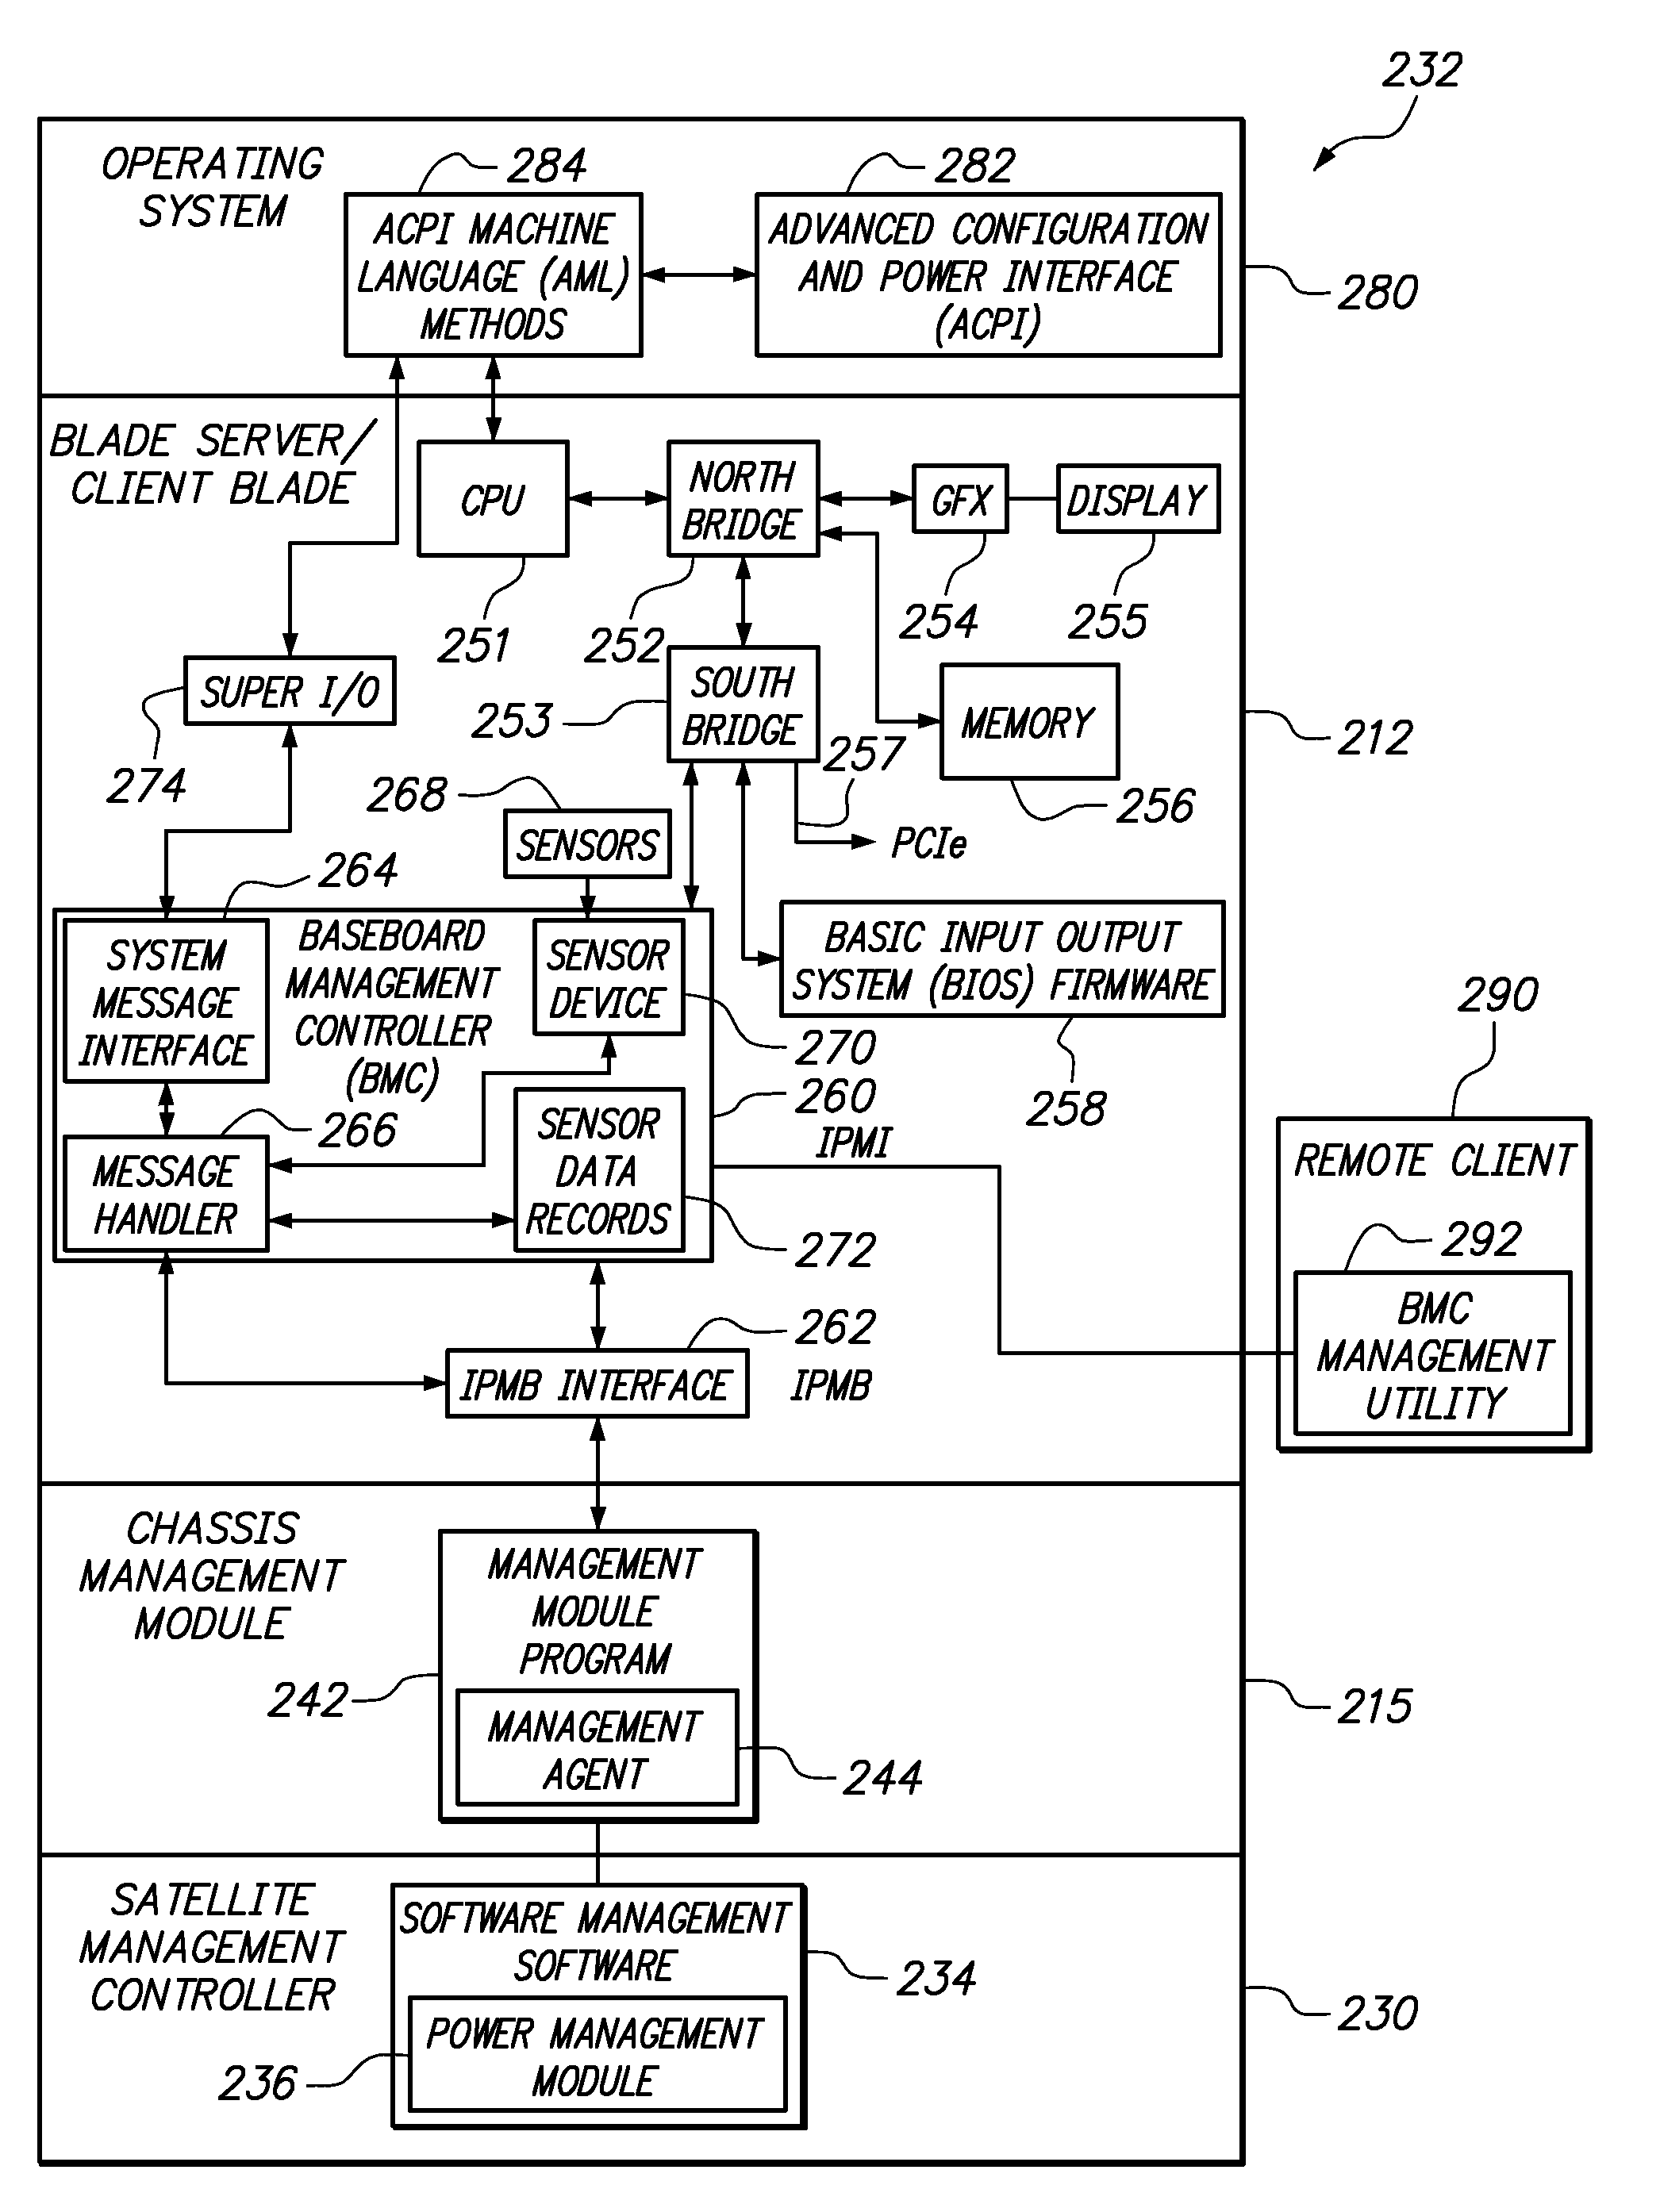 Power management by selective authorization of elevated power states of computer system hardware devices